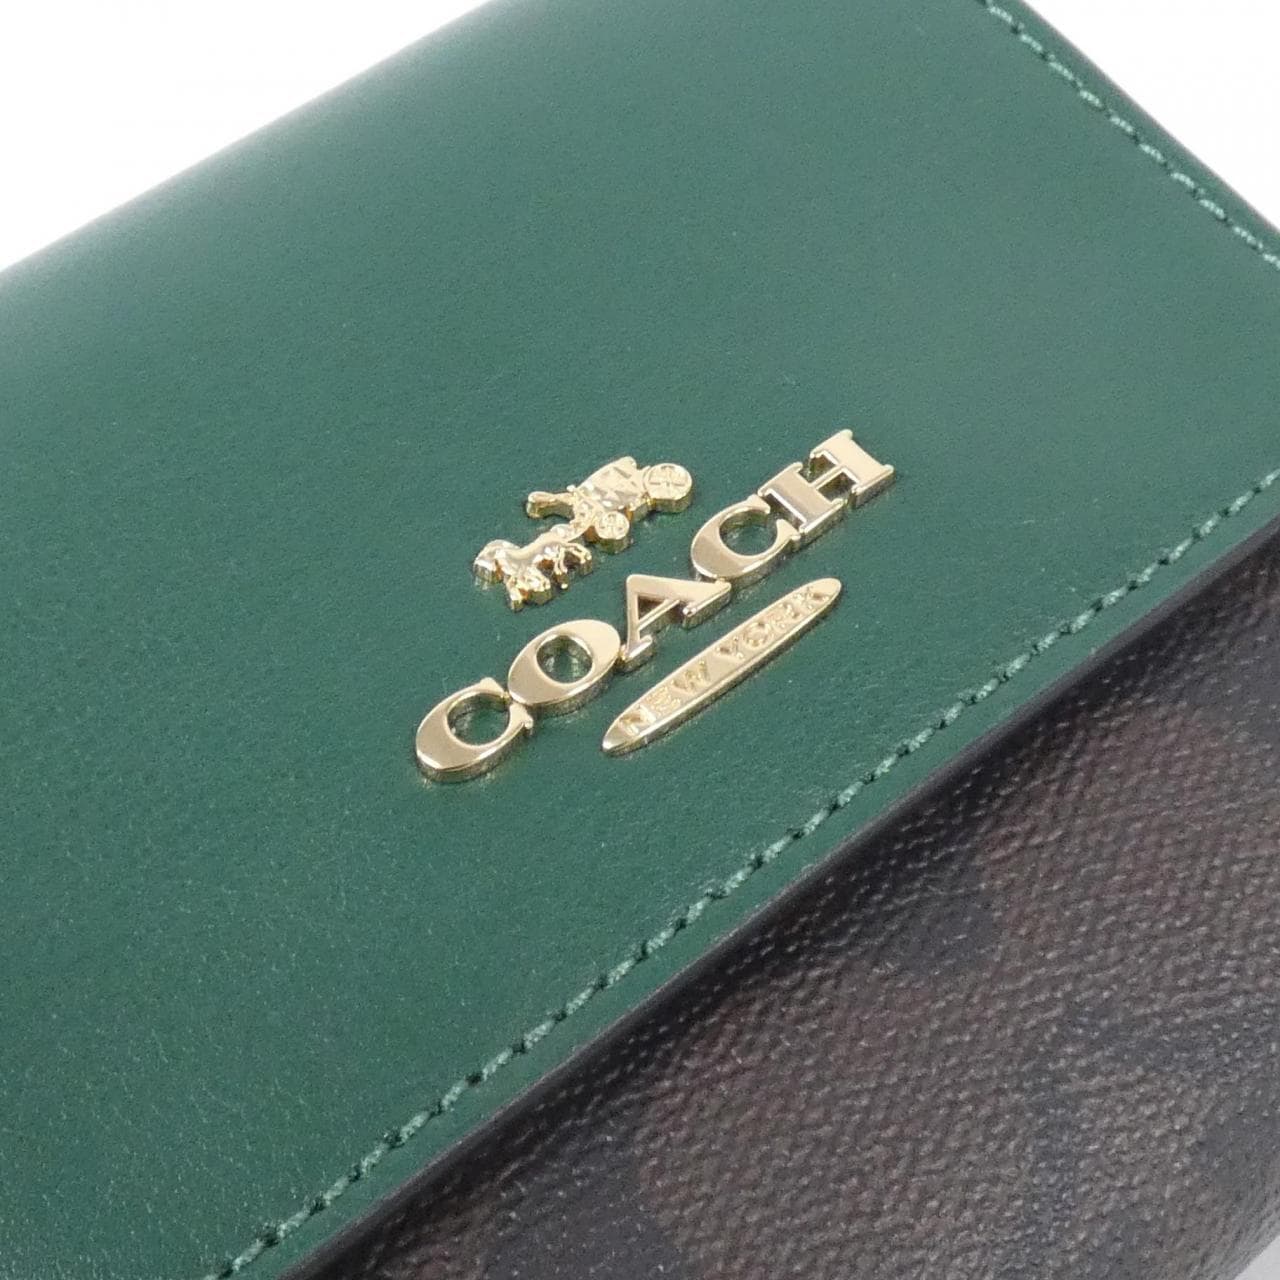 [BRAND NEW] Coach CE930 Wallet